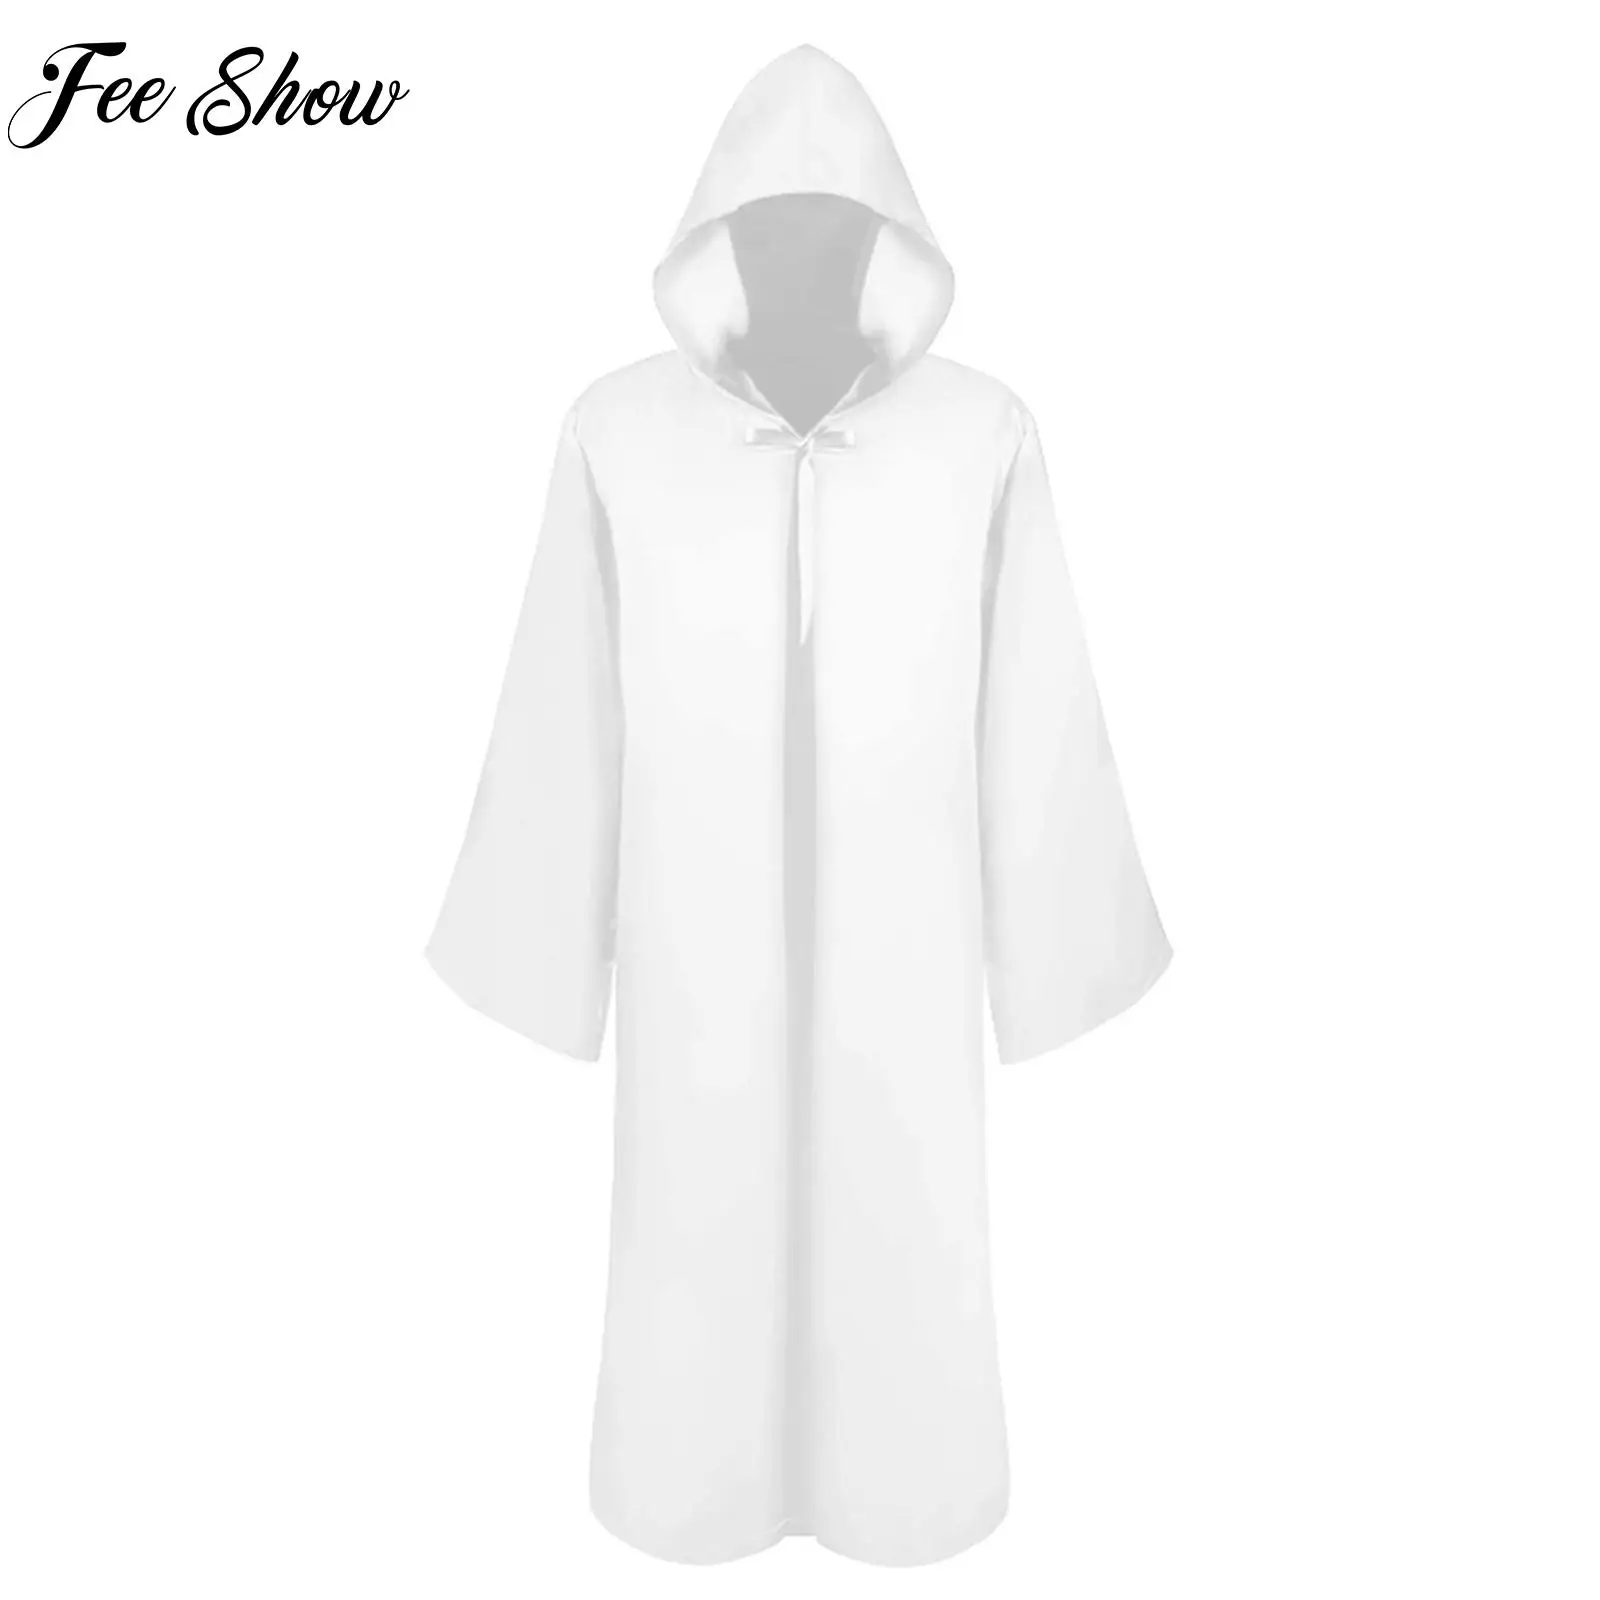 

Mens The War of Galaxies Cosplay Adult Robe Long Sleeve Tunic Hooded Cloak Tie String Cape Halloween Costumes